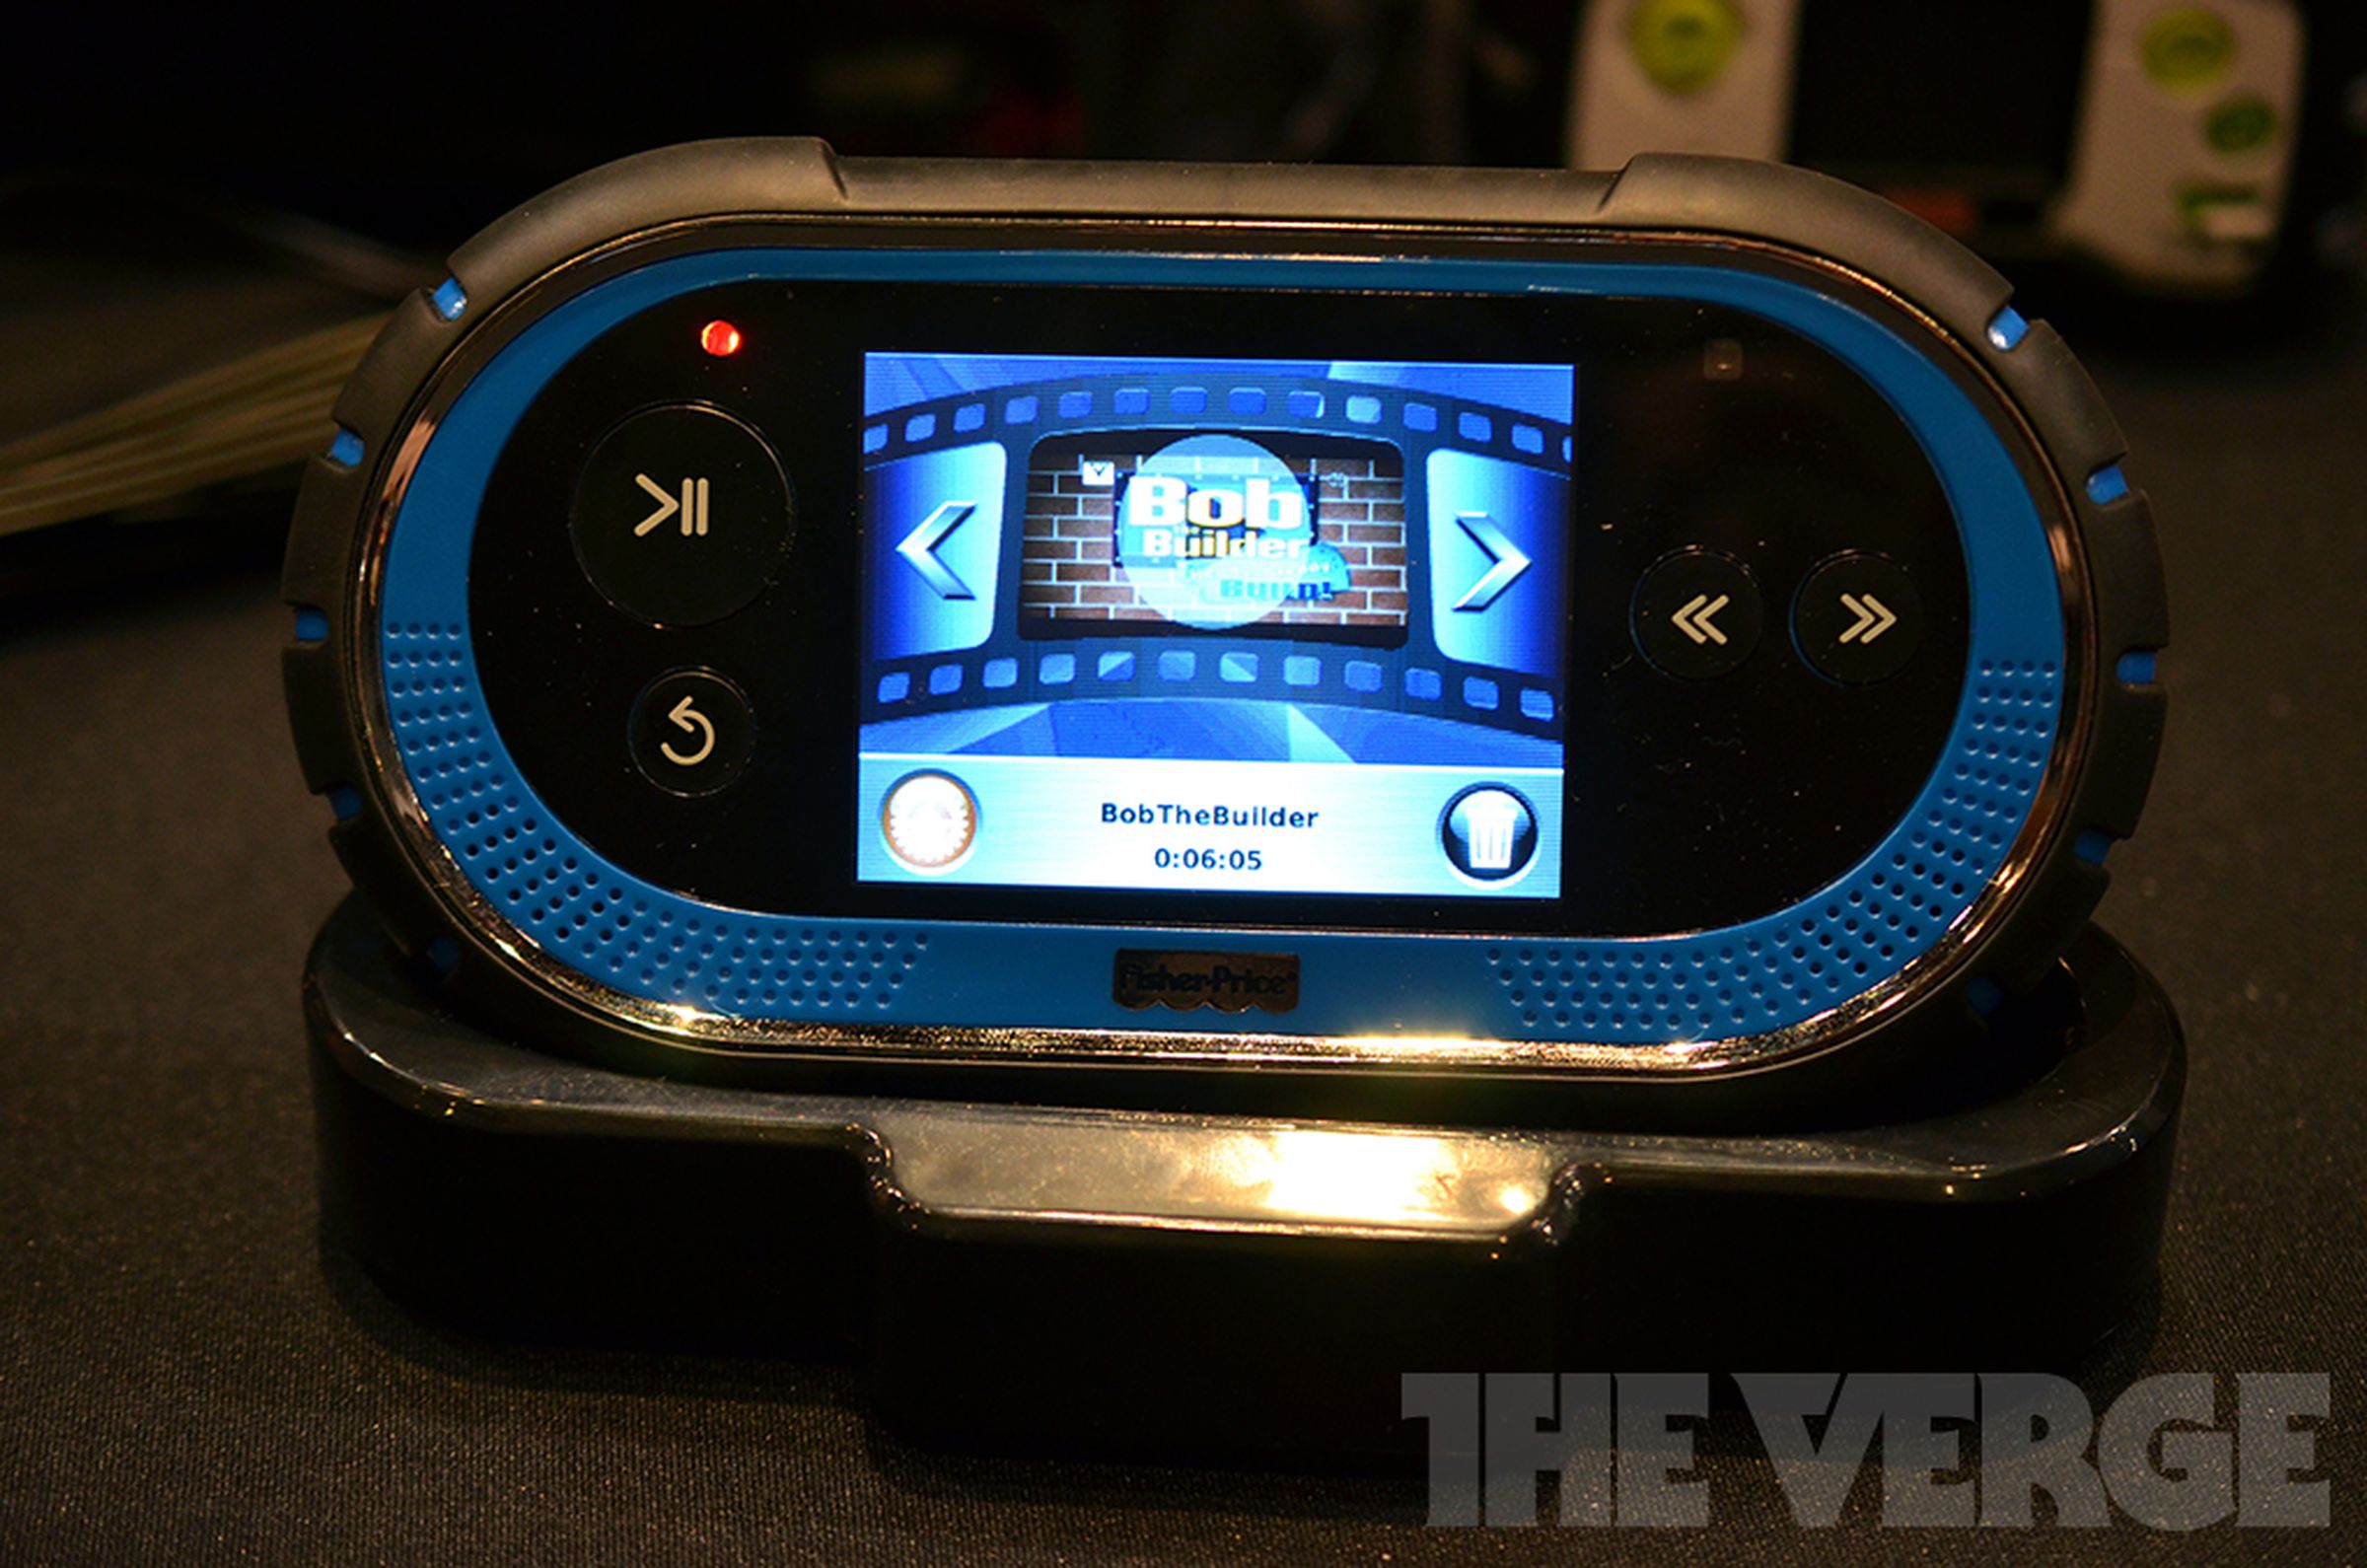 Fisher-Price Kid-Tough Portable DVR hands-on photos